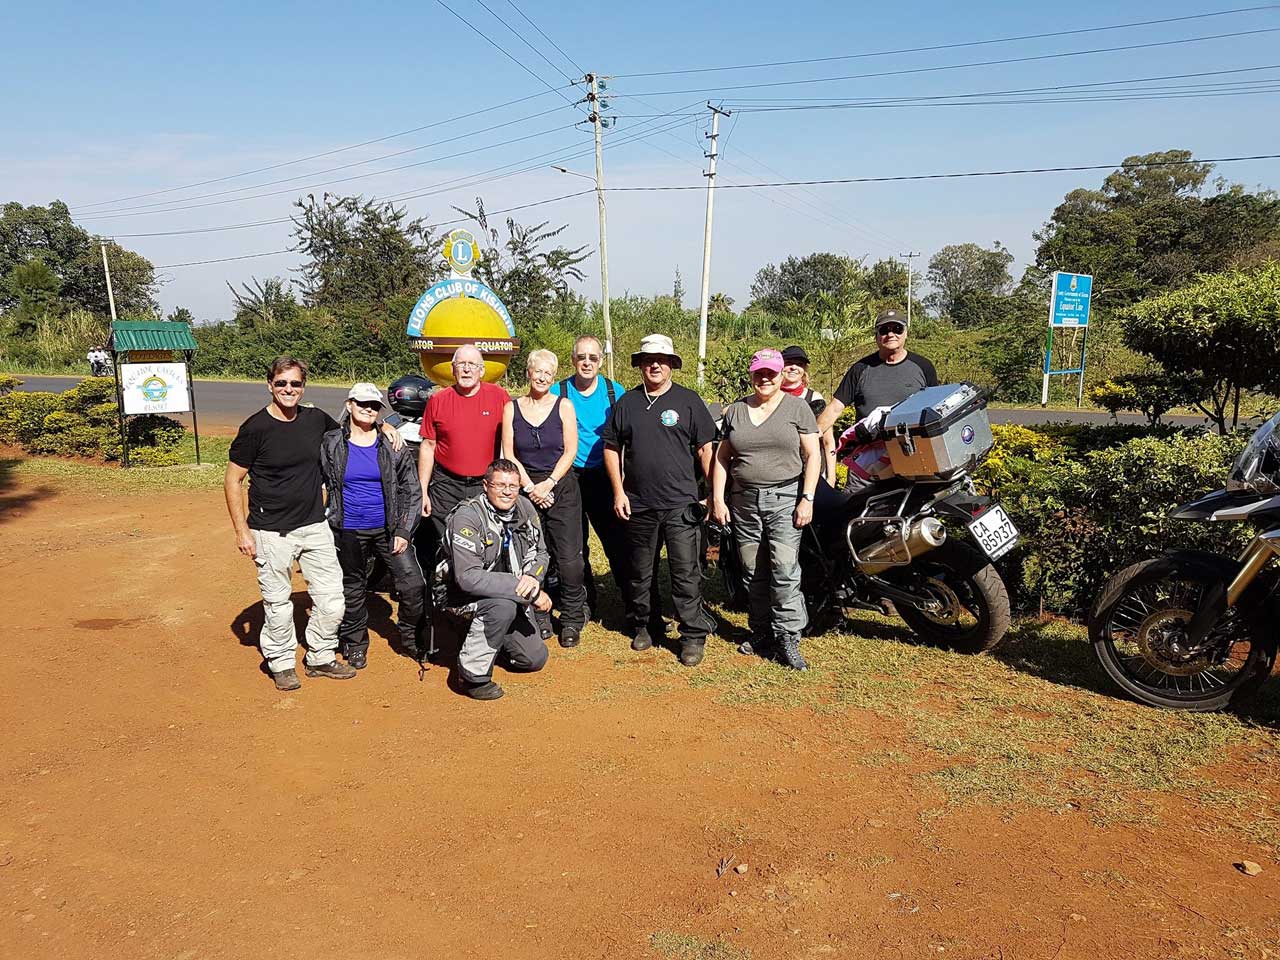 Day 2 - Heart of Africa Motorcycle Tour